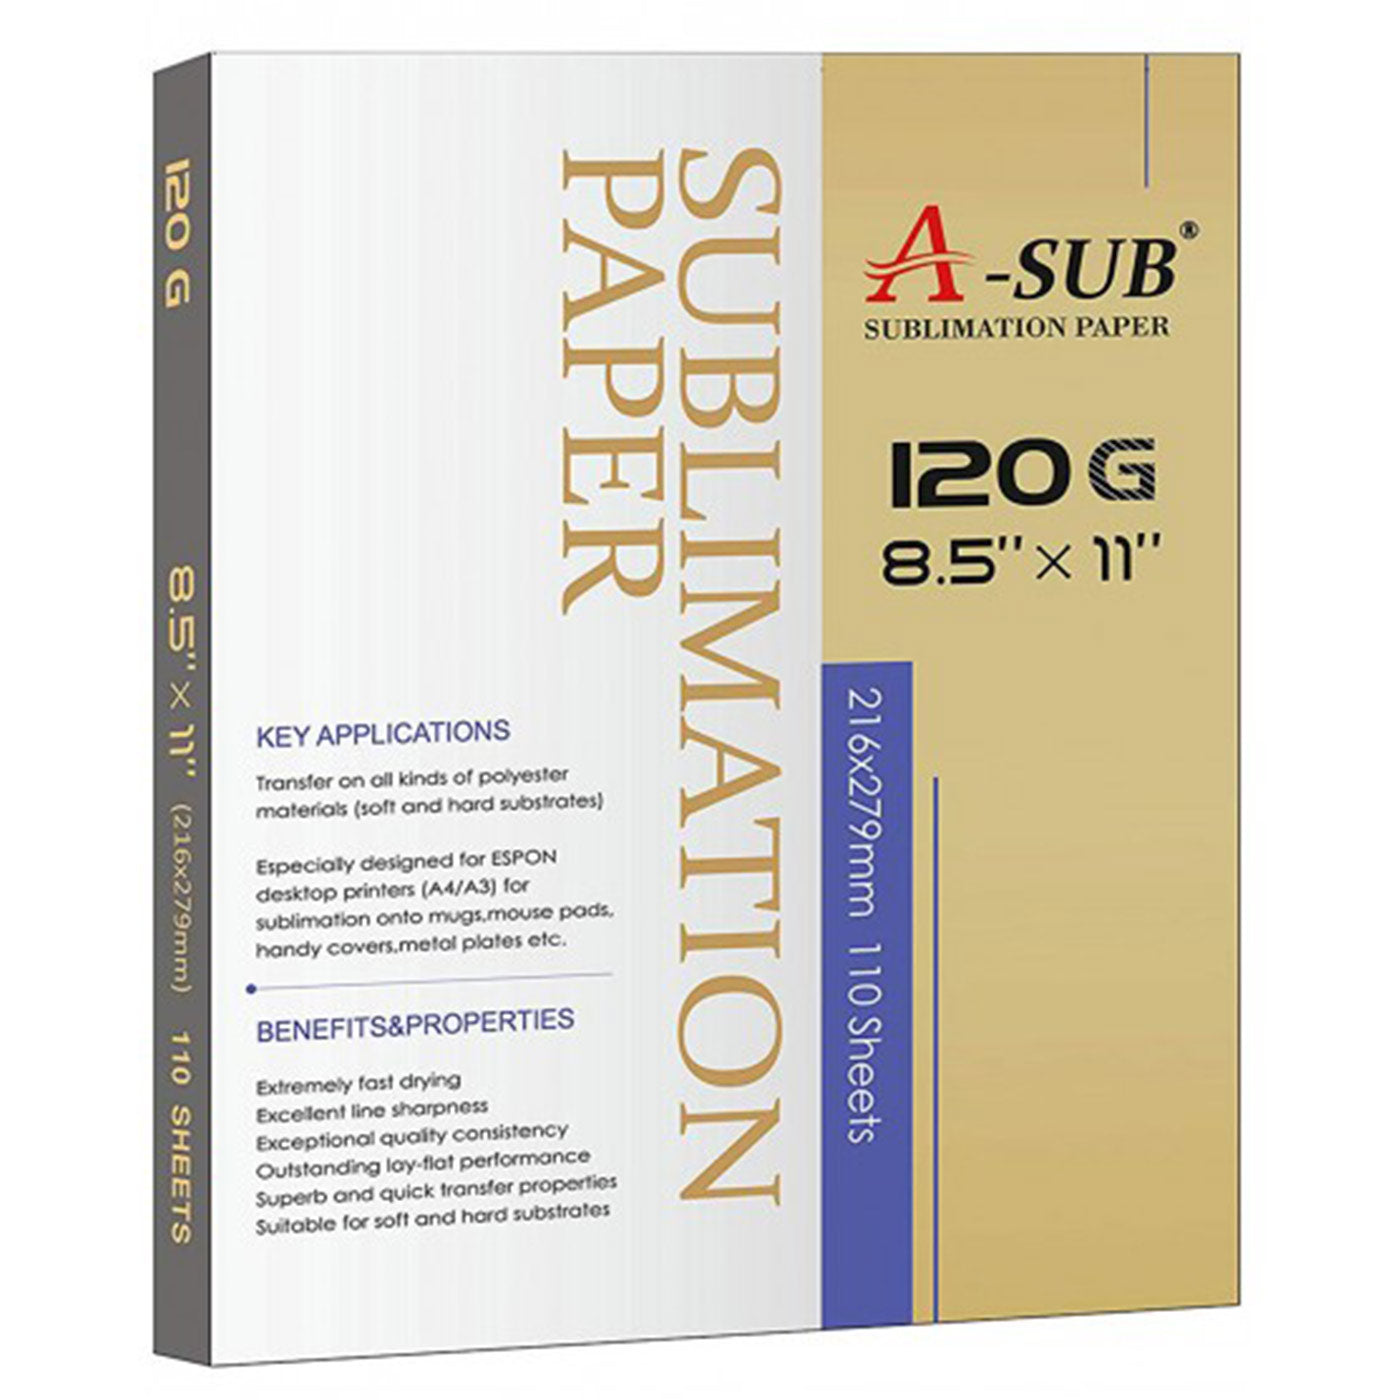 A-SUB Sublimation Paper 120gsm 110 Sheets Used For All Inkjet